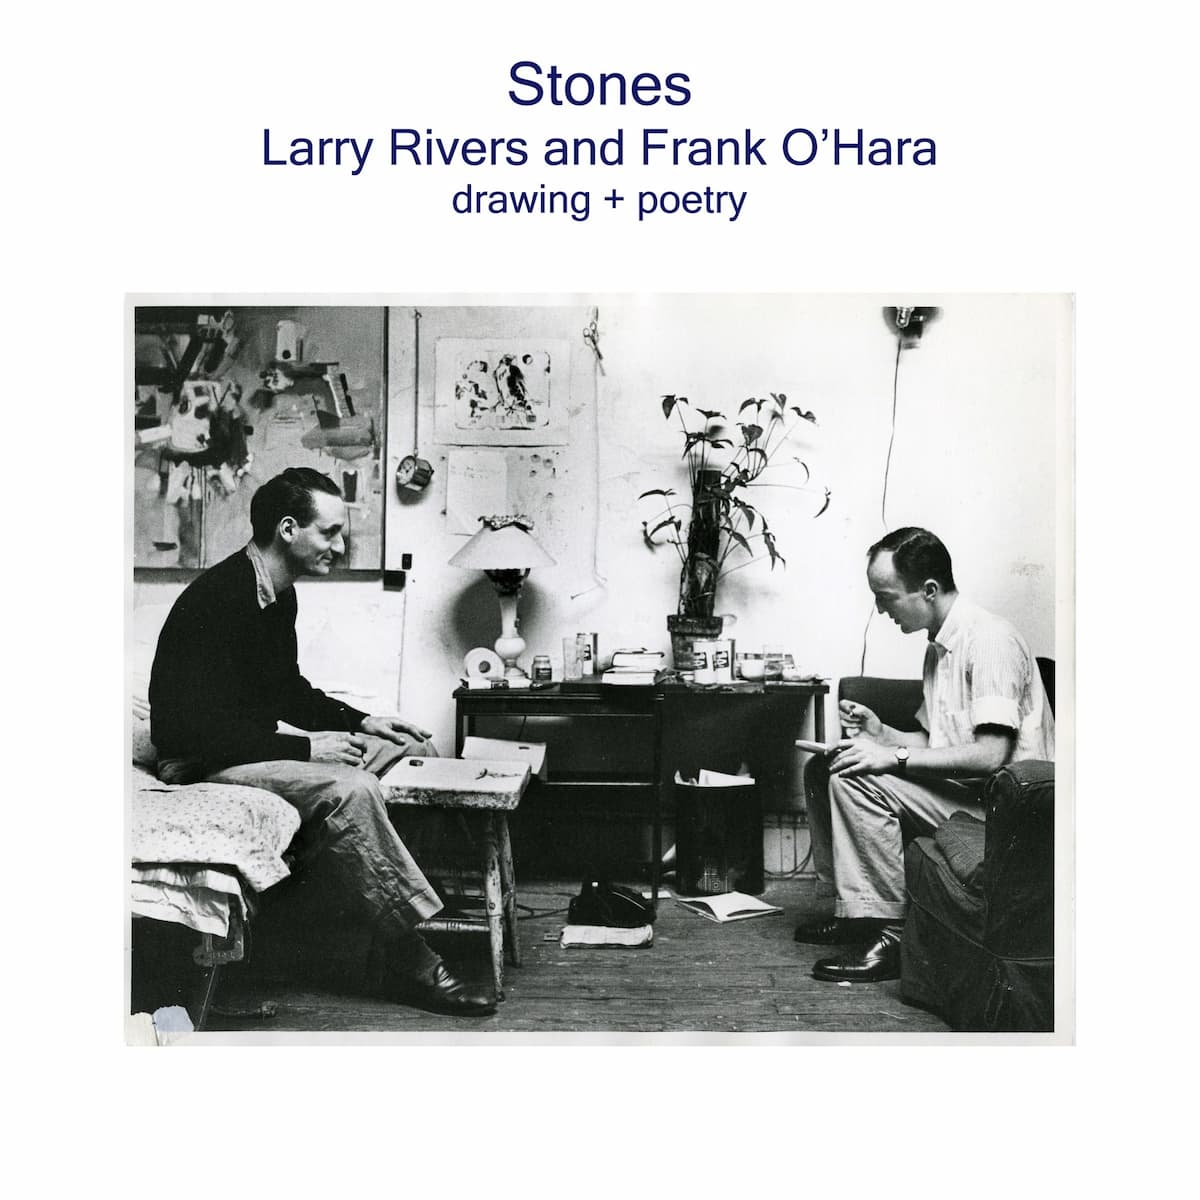 Larry Rivers (left) and Frank O’Hara (right)